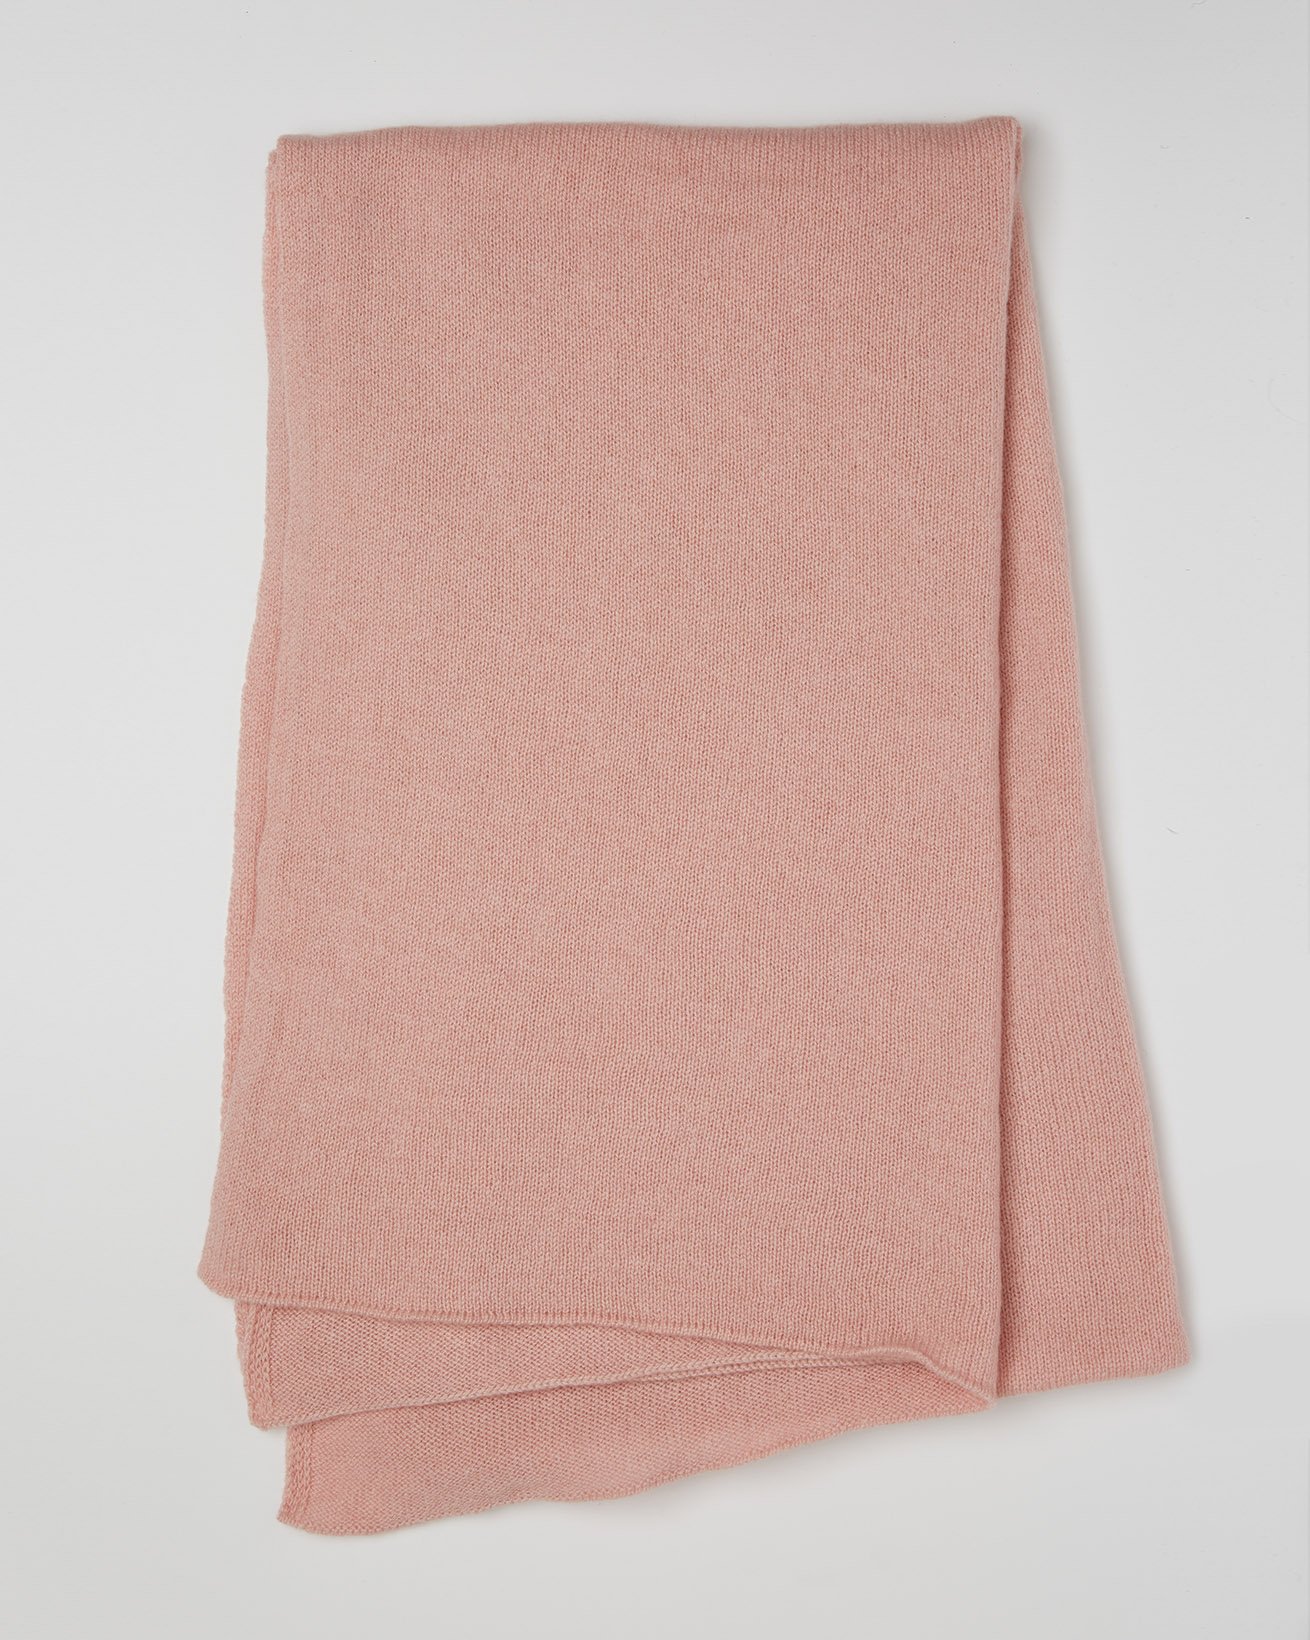 2610 - cashmere stole - pink - one size.jpg